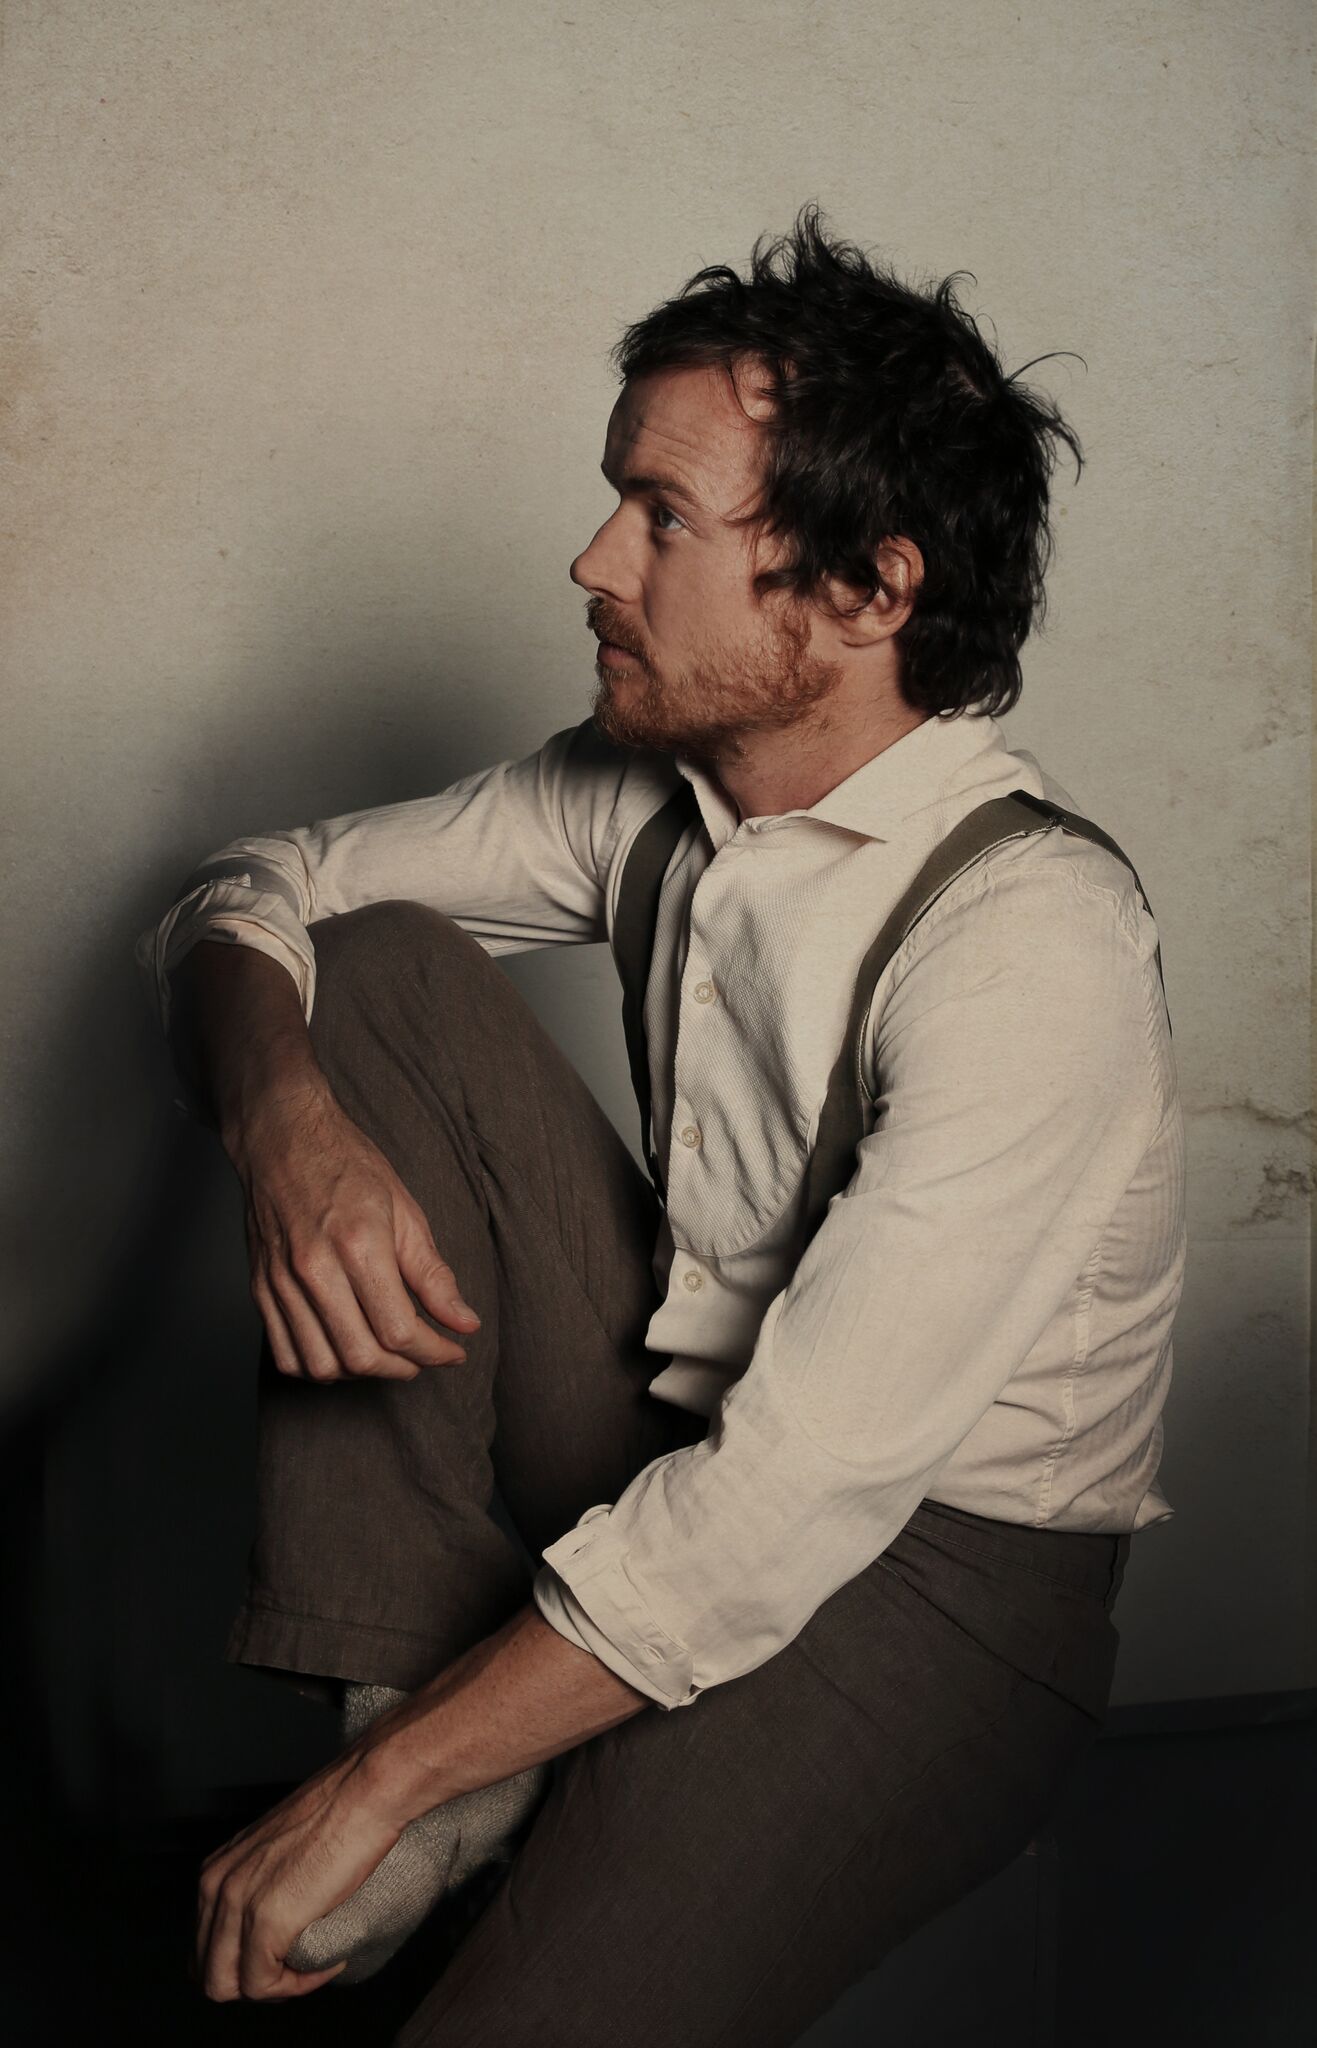 DAMIEN RICE TO RETURN TO AUSTRALIA IN FEBRUARY 2019 FOR FIRST SHOWS IN OVER A DECADE